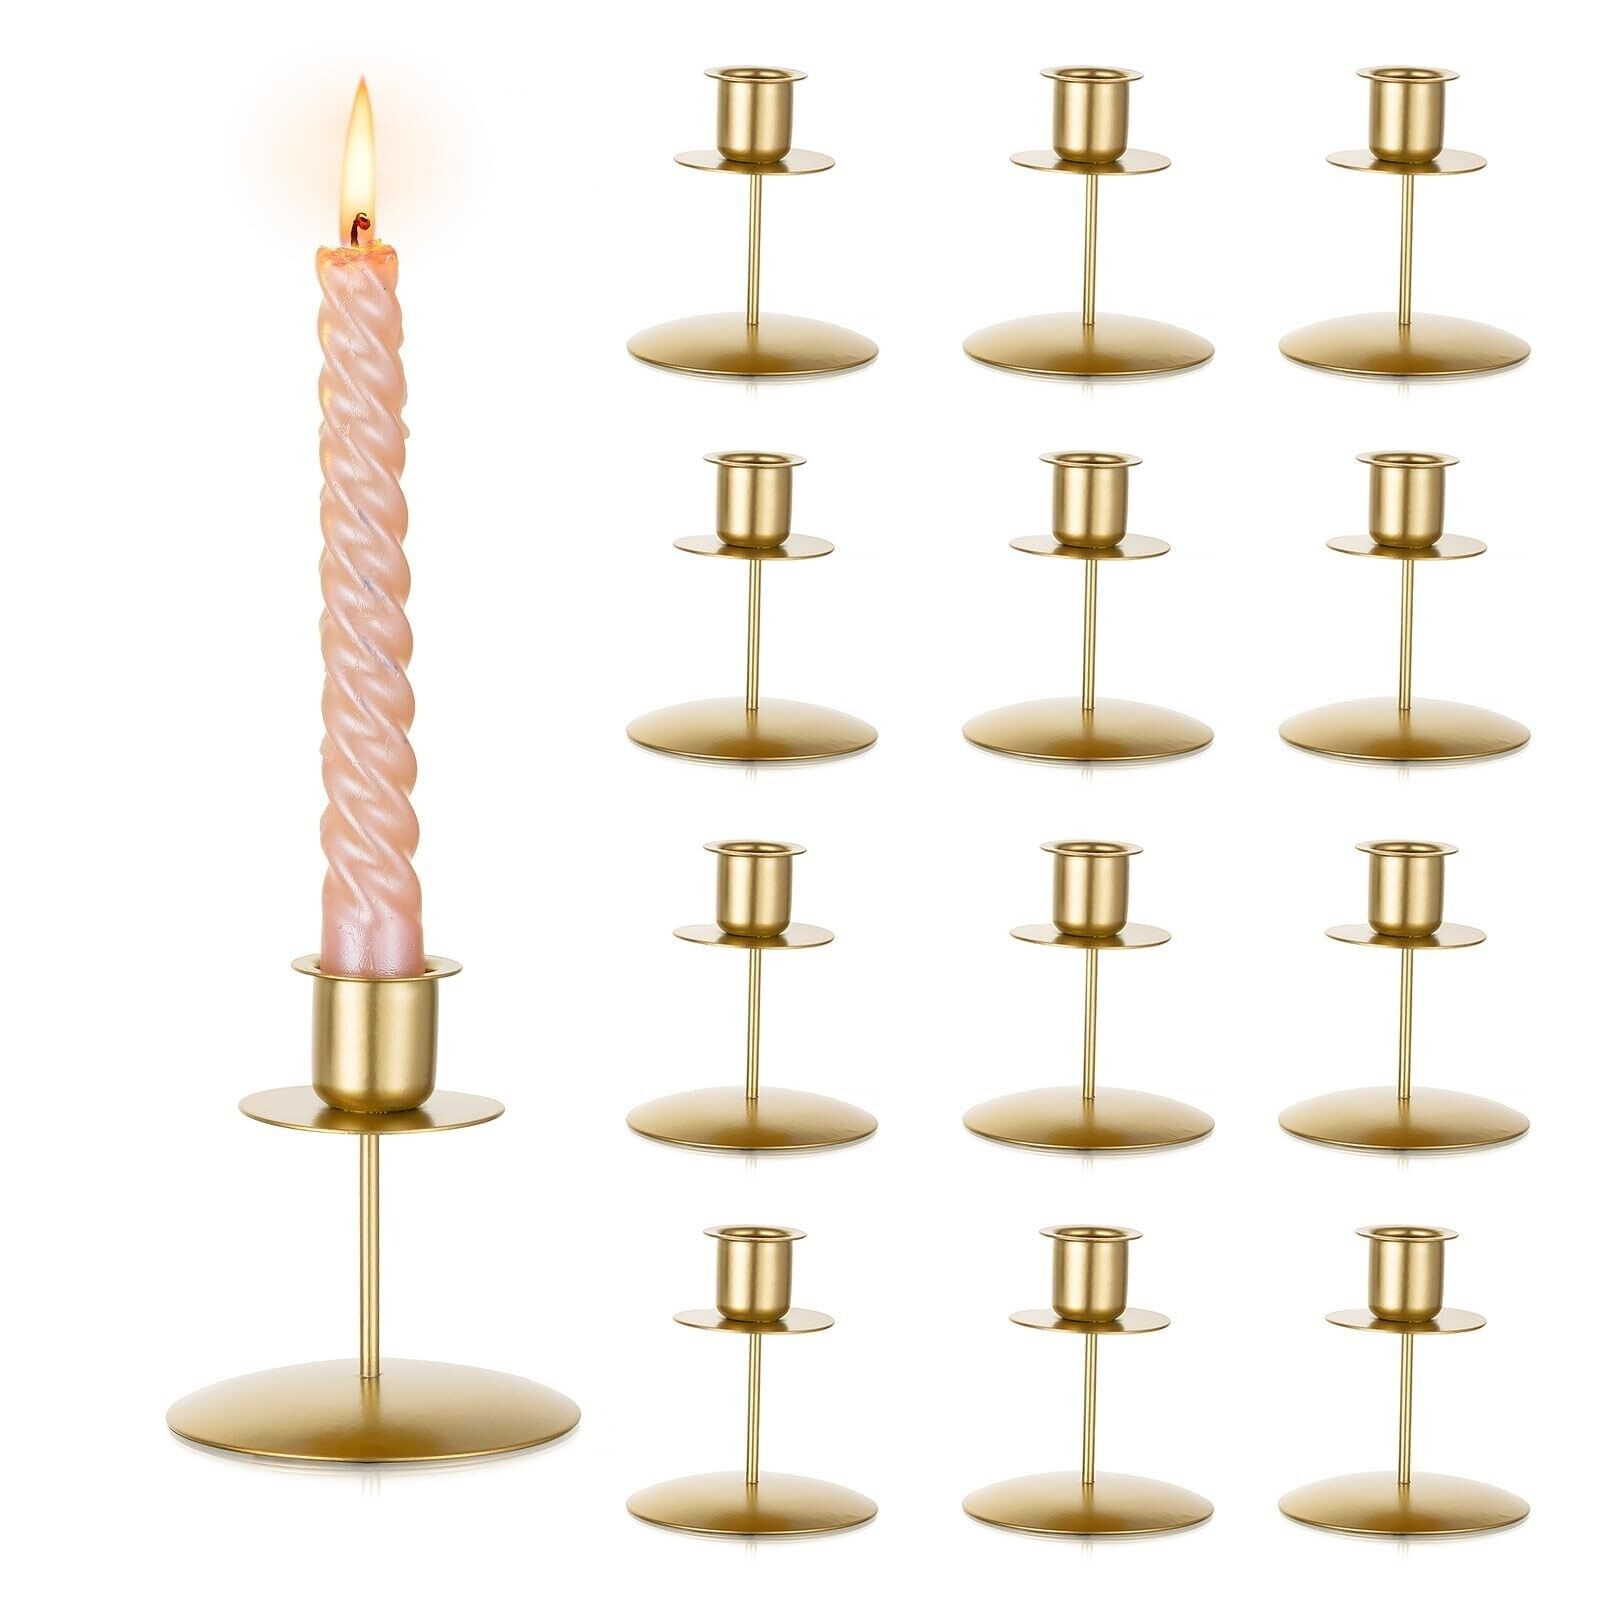 Sziqiqi Taper Candlestick Holder Gold - Pack of 12 Candle Stick Holders Bulk ...